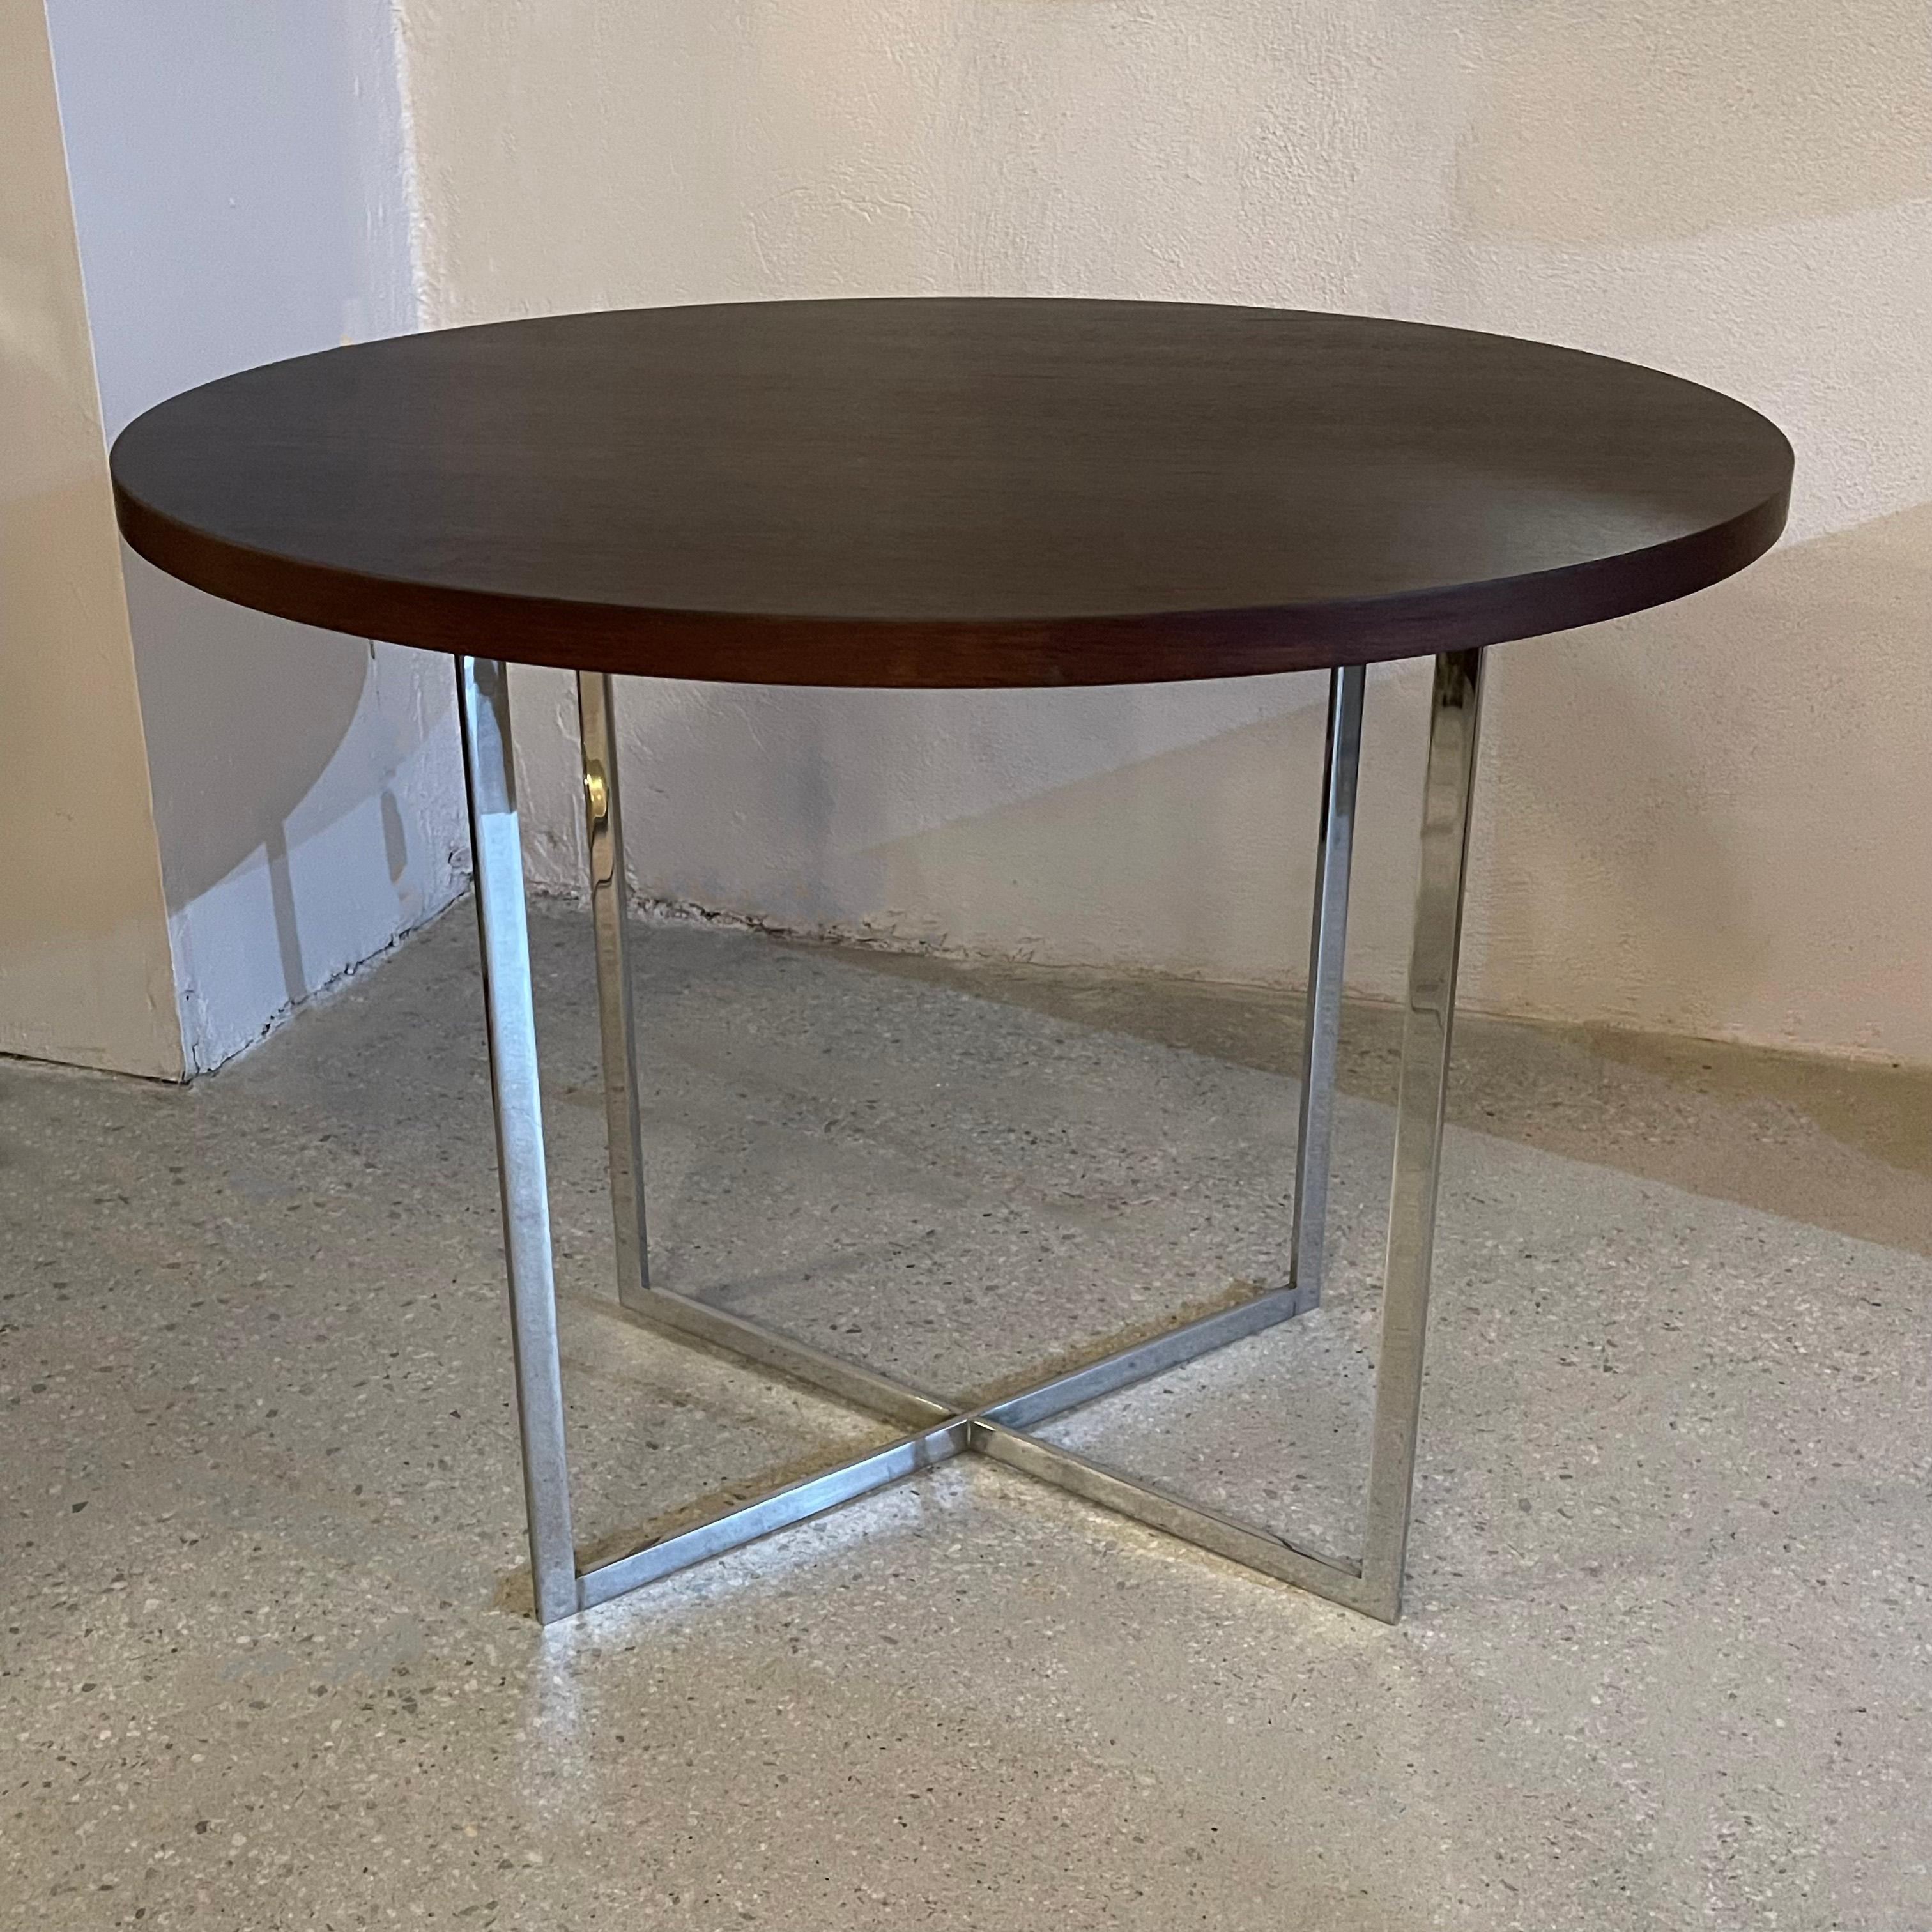 Mid-century modern, 1970's dining table features a 36